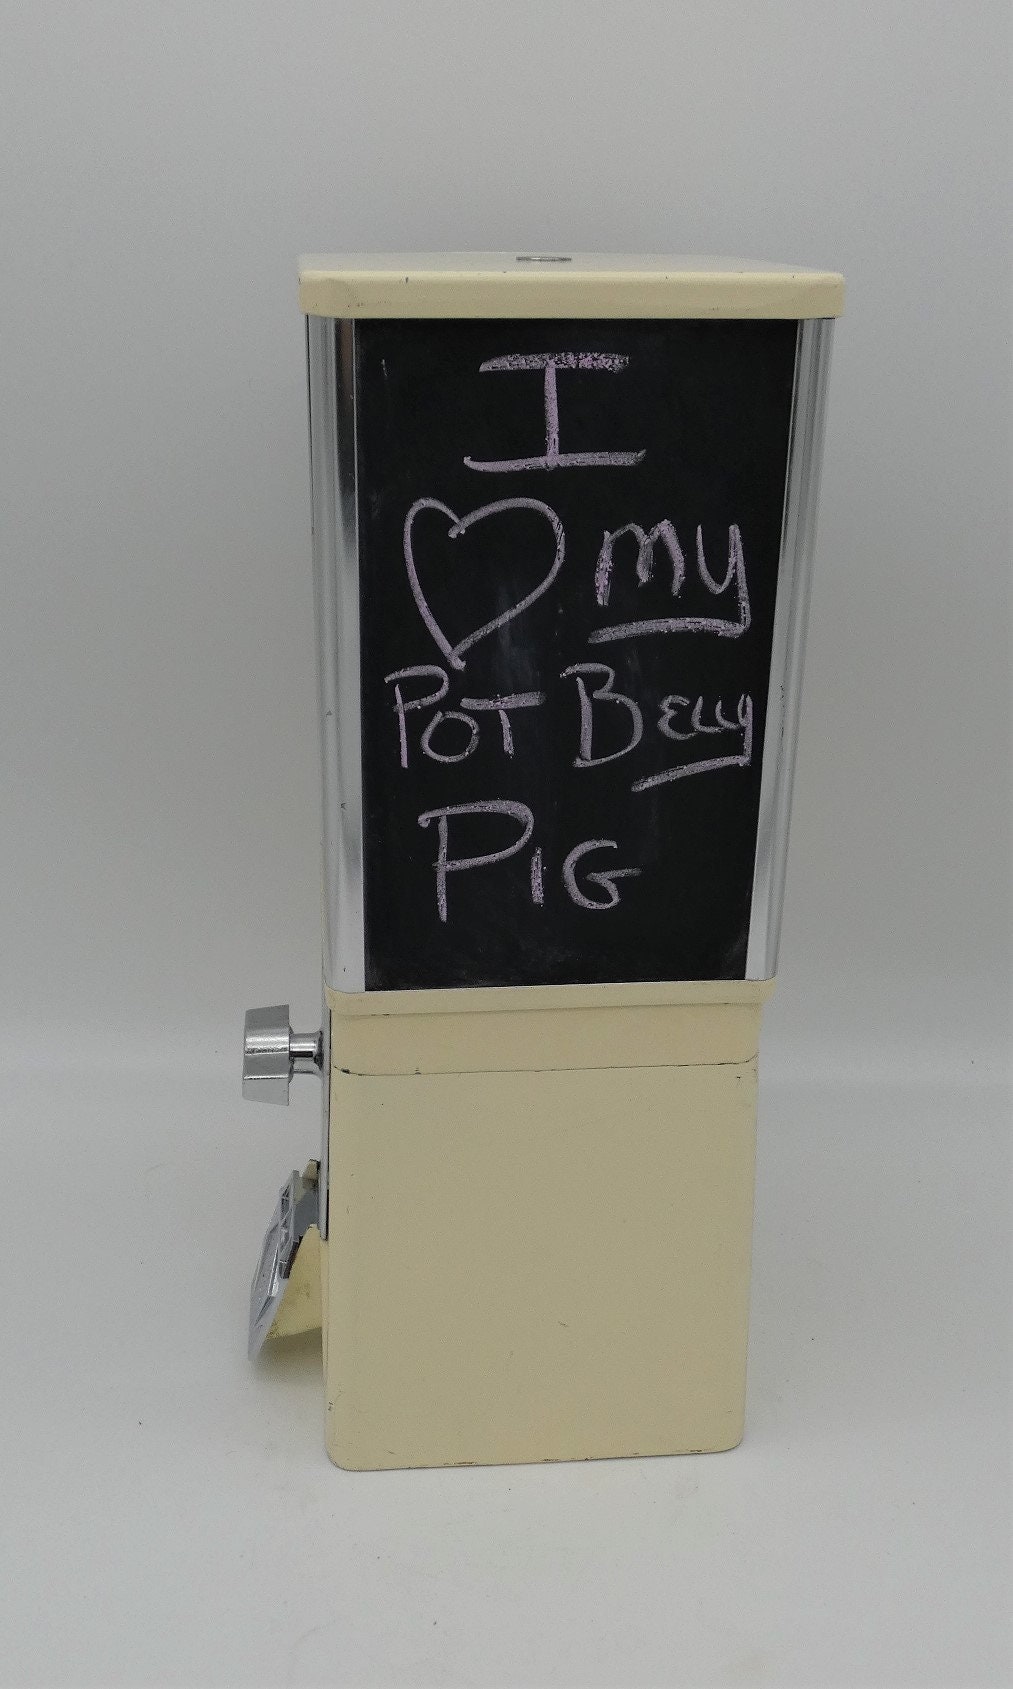 POT BELLIED PIGS Treat Dispenser in white Repurposed from Authentic Vintage Gumball Machine with Chalkboard Panels